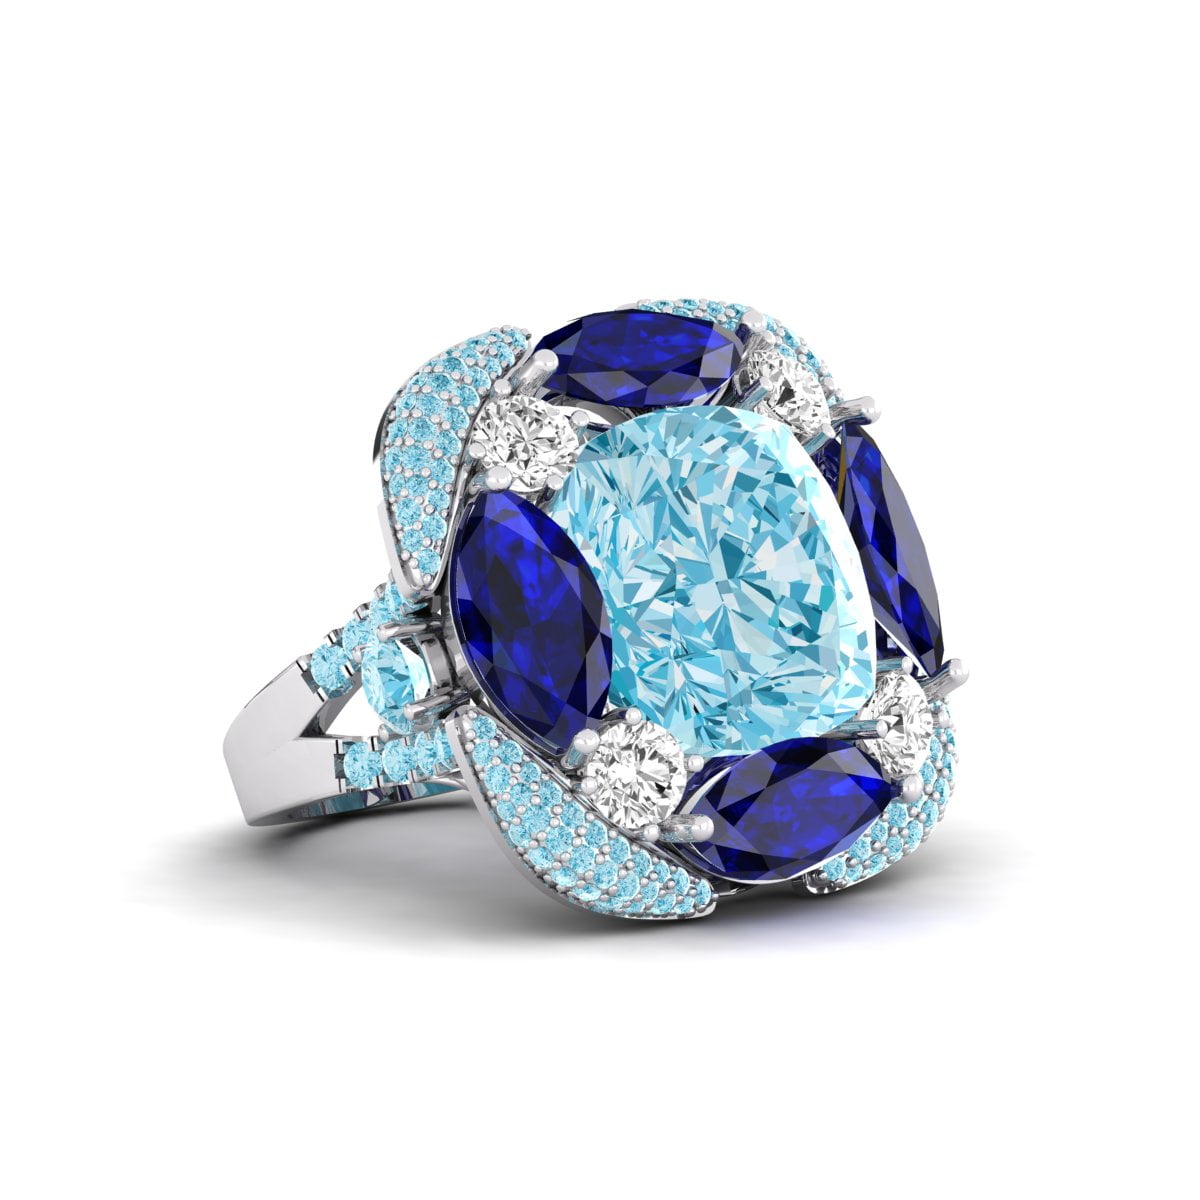 Aqua Cushion & Round With Blue Marquise CZ Stone Cocktail Ring (21 8/9 TCW)